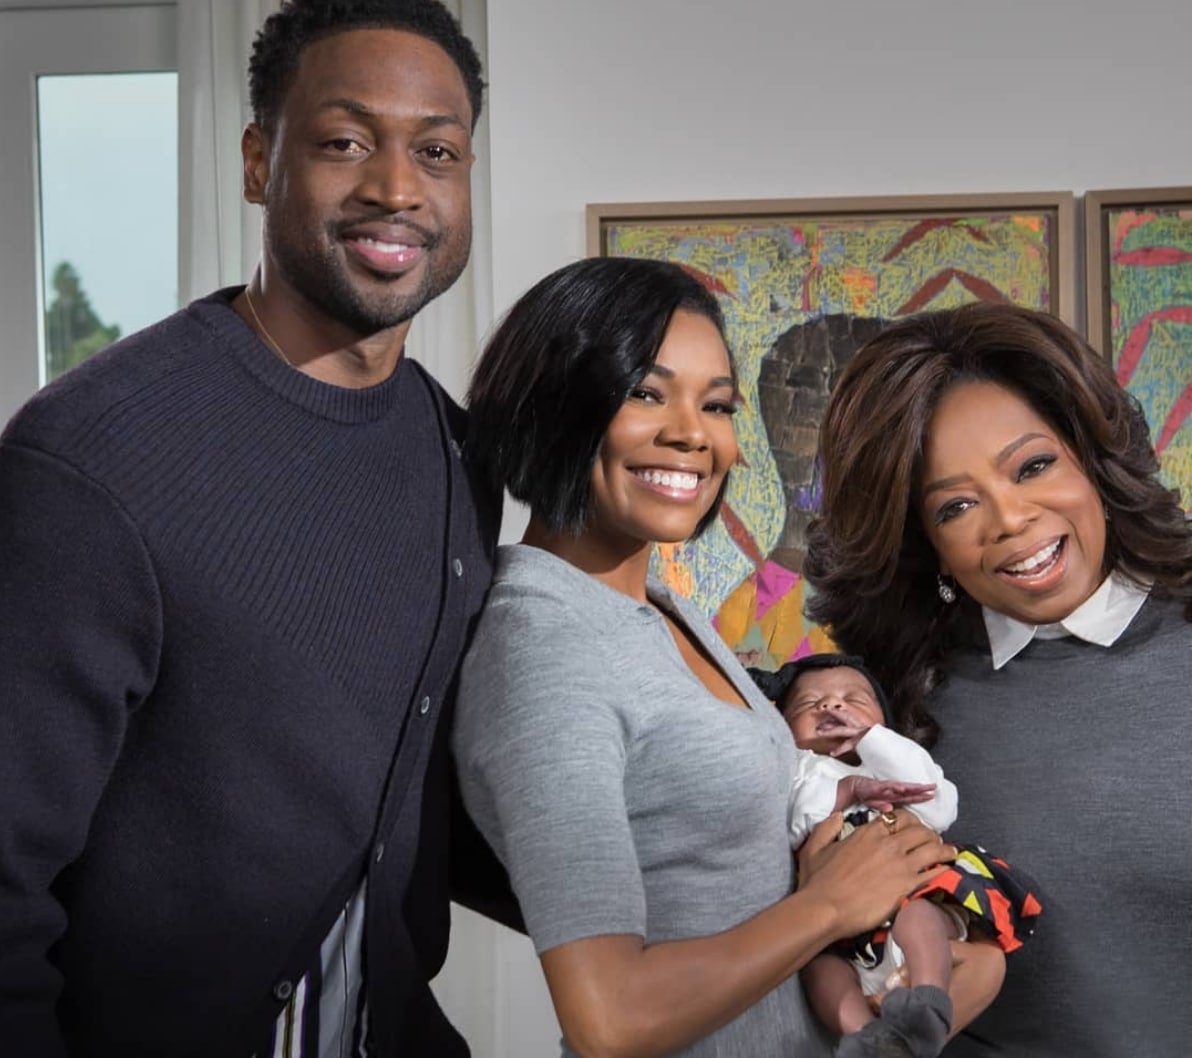 Gabrielle Union And Dwyane Wade To Join Oprah For First Televised Interview With New Baby Girl